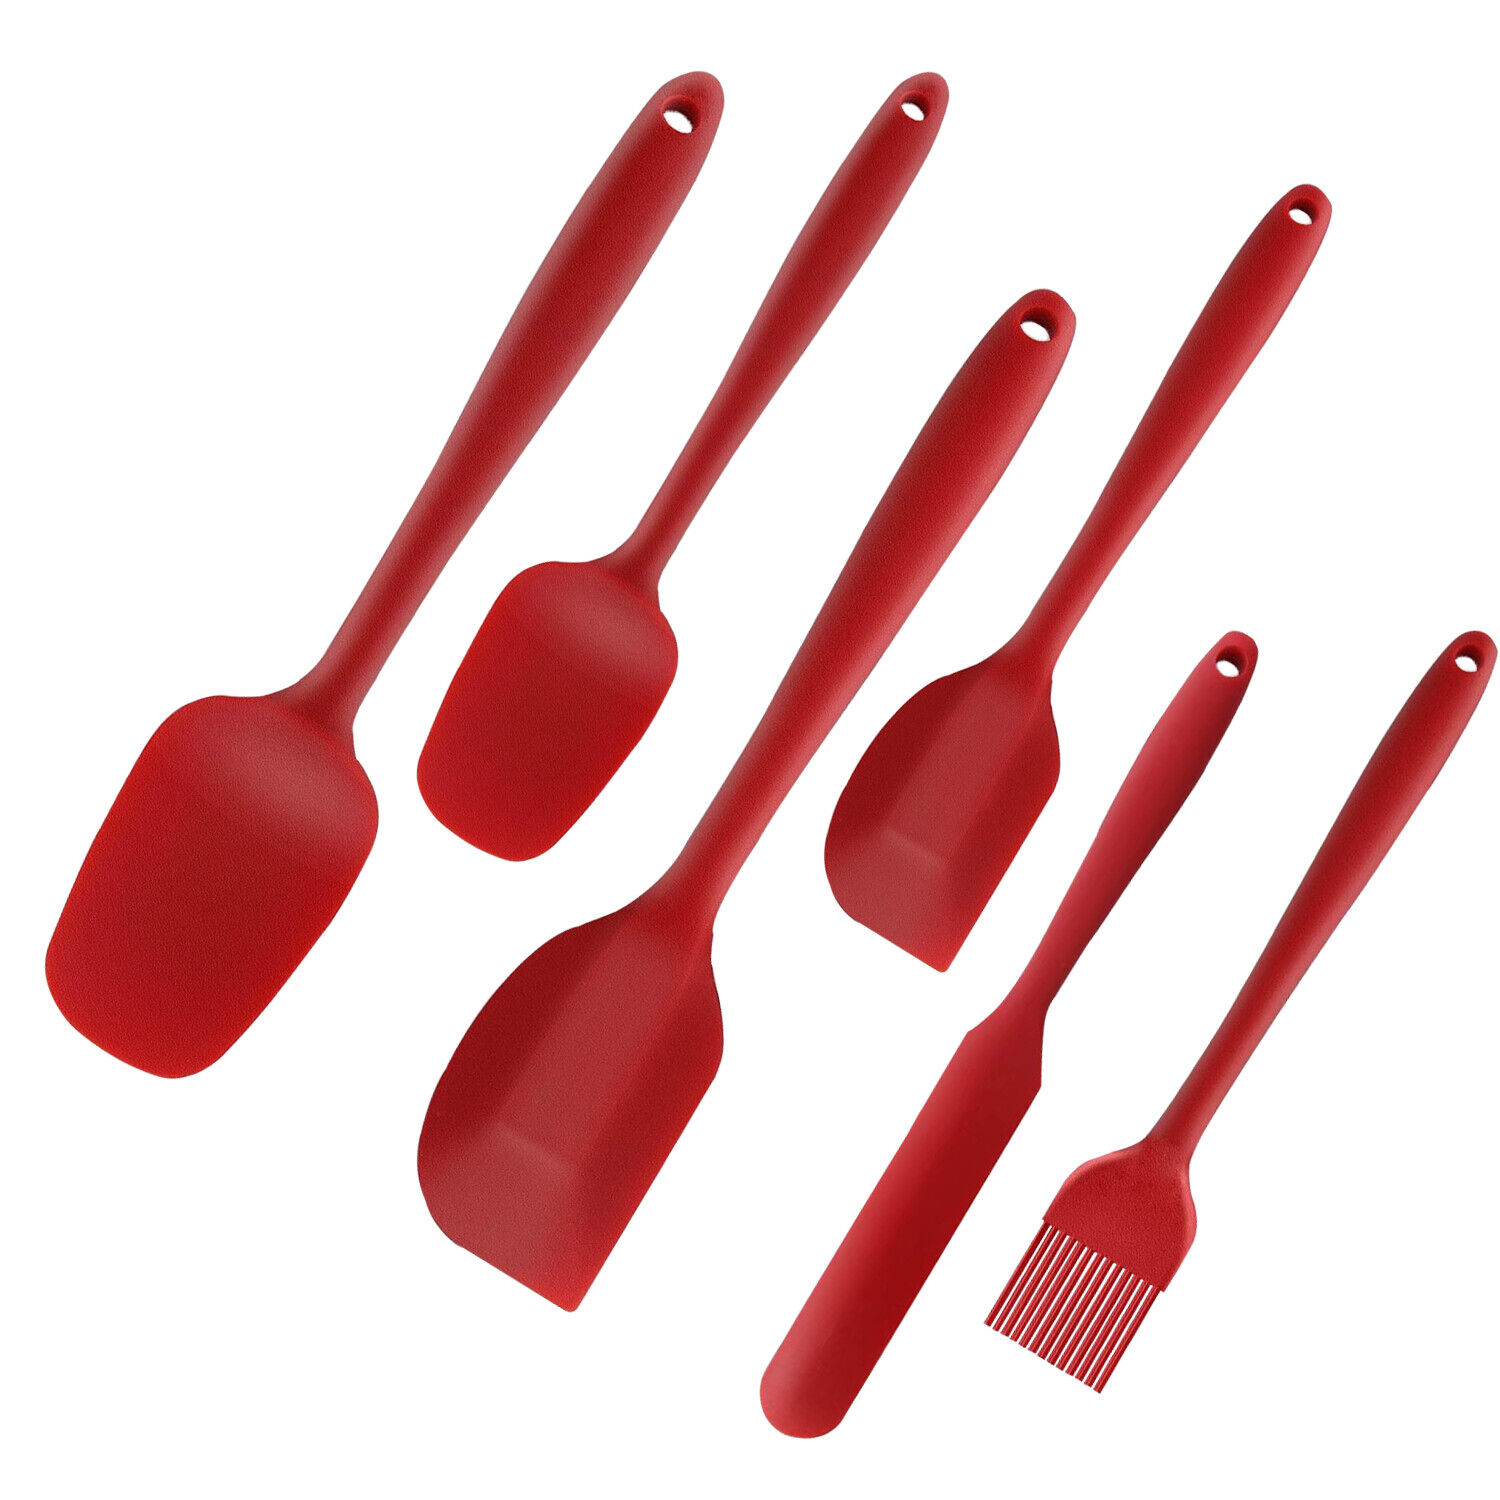 BINHAI Silicone Spatula Set - Red 6 Piece Non - Stick Rubber Spatula with  Stainless Steel Core - Heat-Resistant Spatula Kitchen Utensils Set for  Cooking, Baking and Mixing 